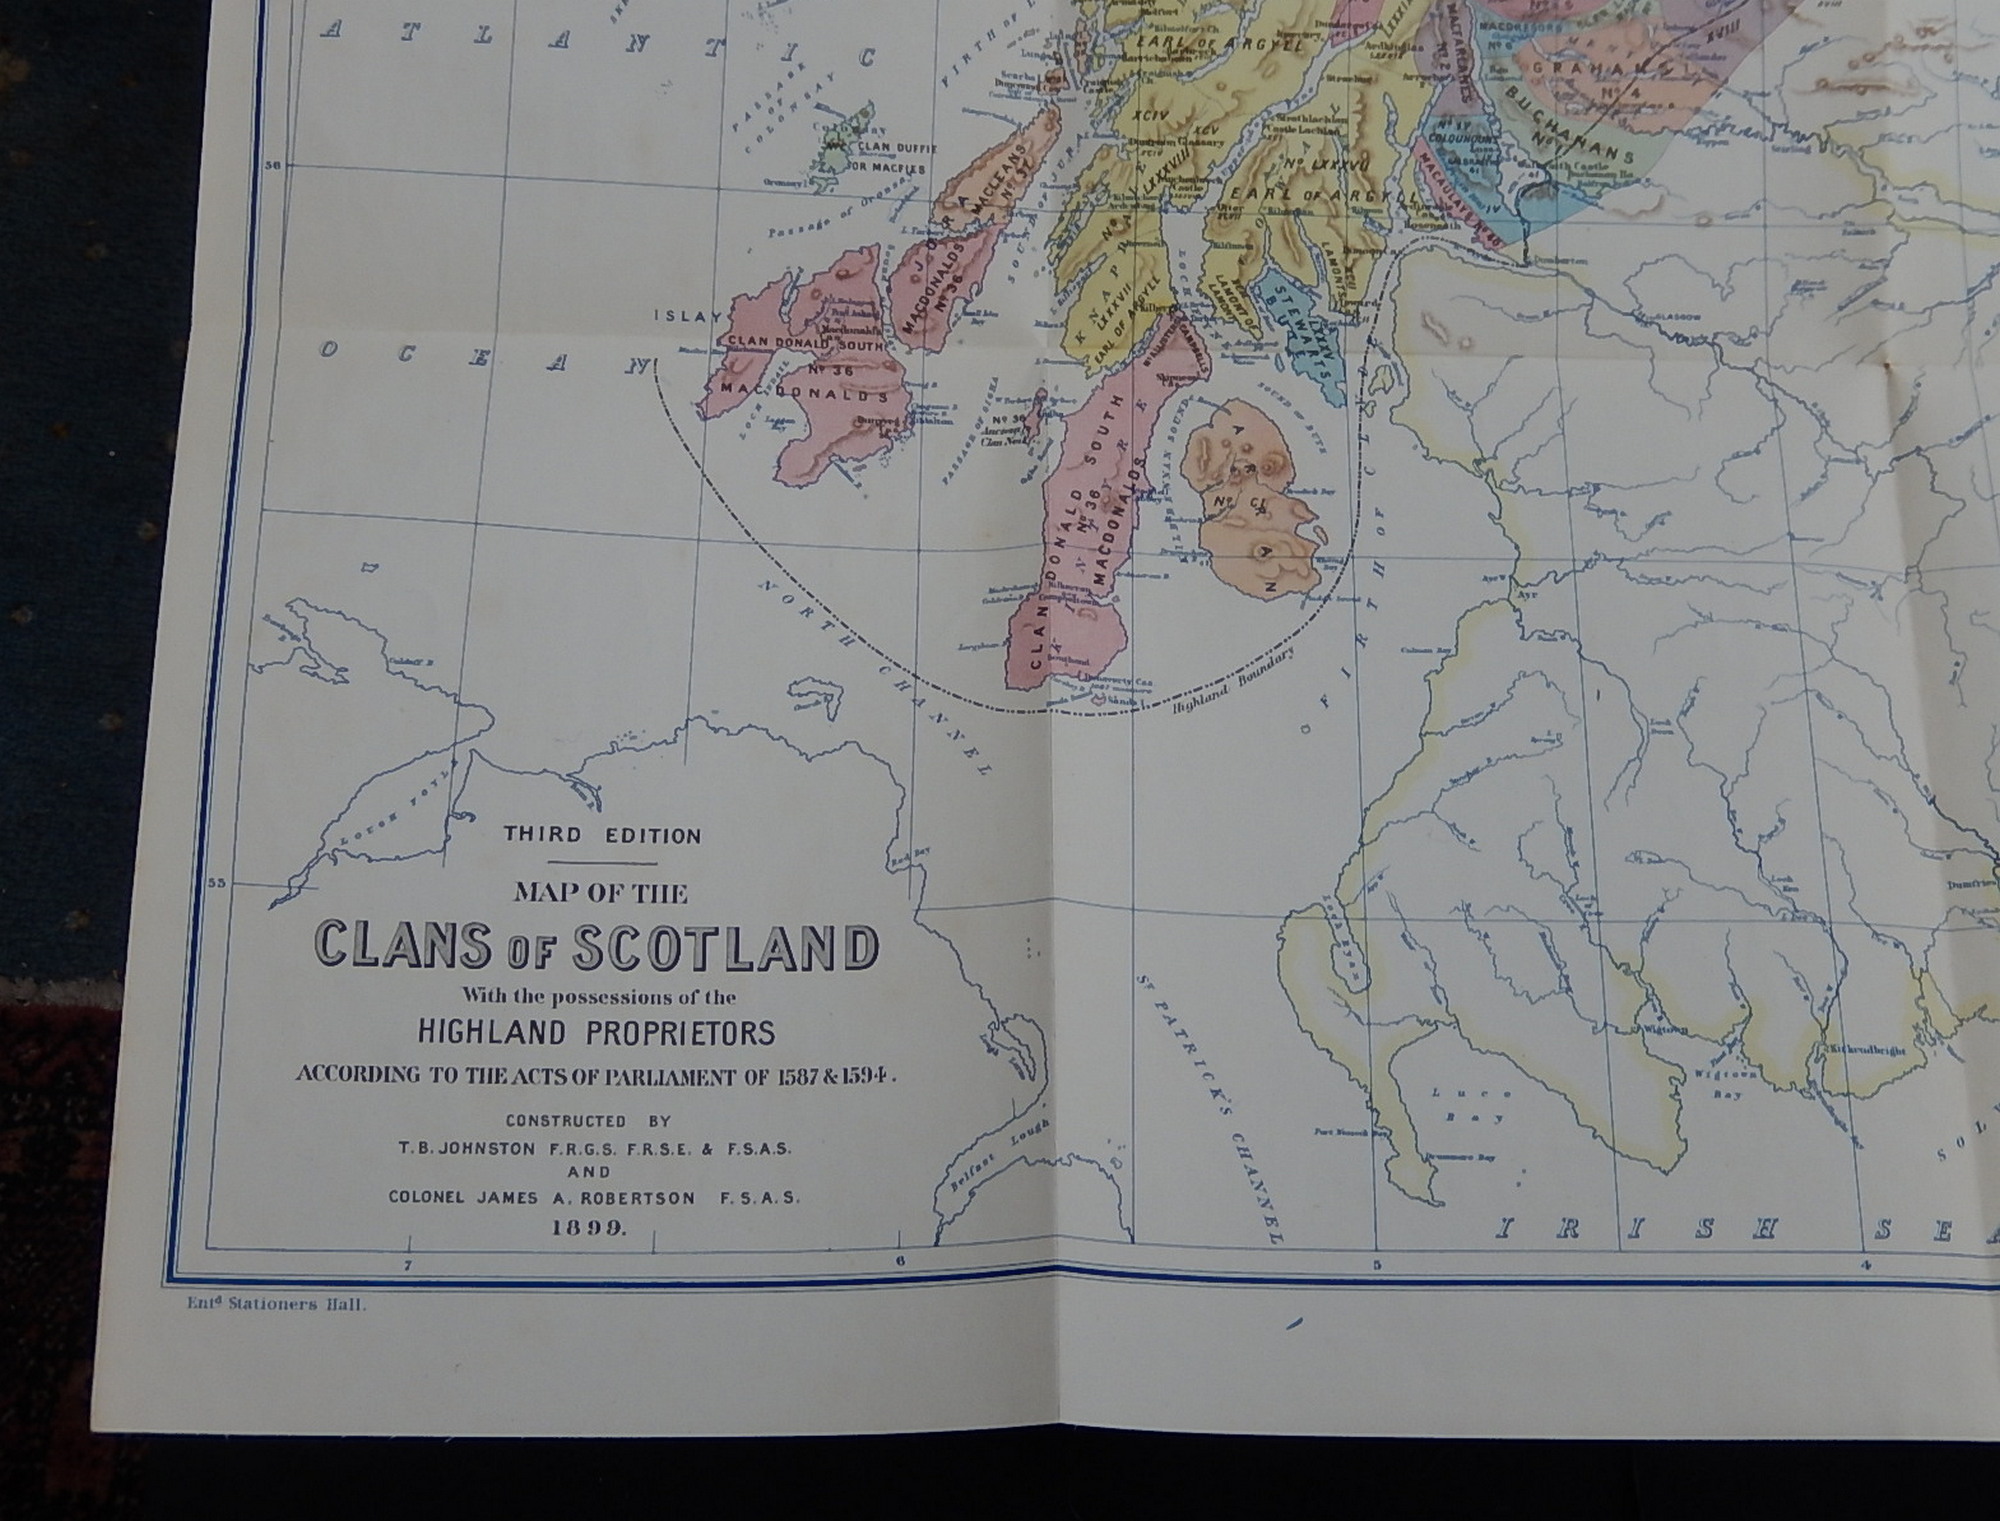 Historical Geography of the Clans of Scotland, T.B. Johnston and J.A. Robertson - 1899. - Image 6 of 7